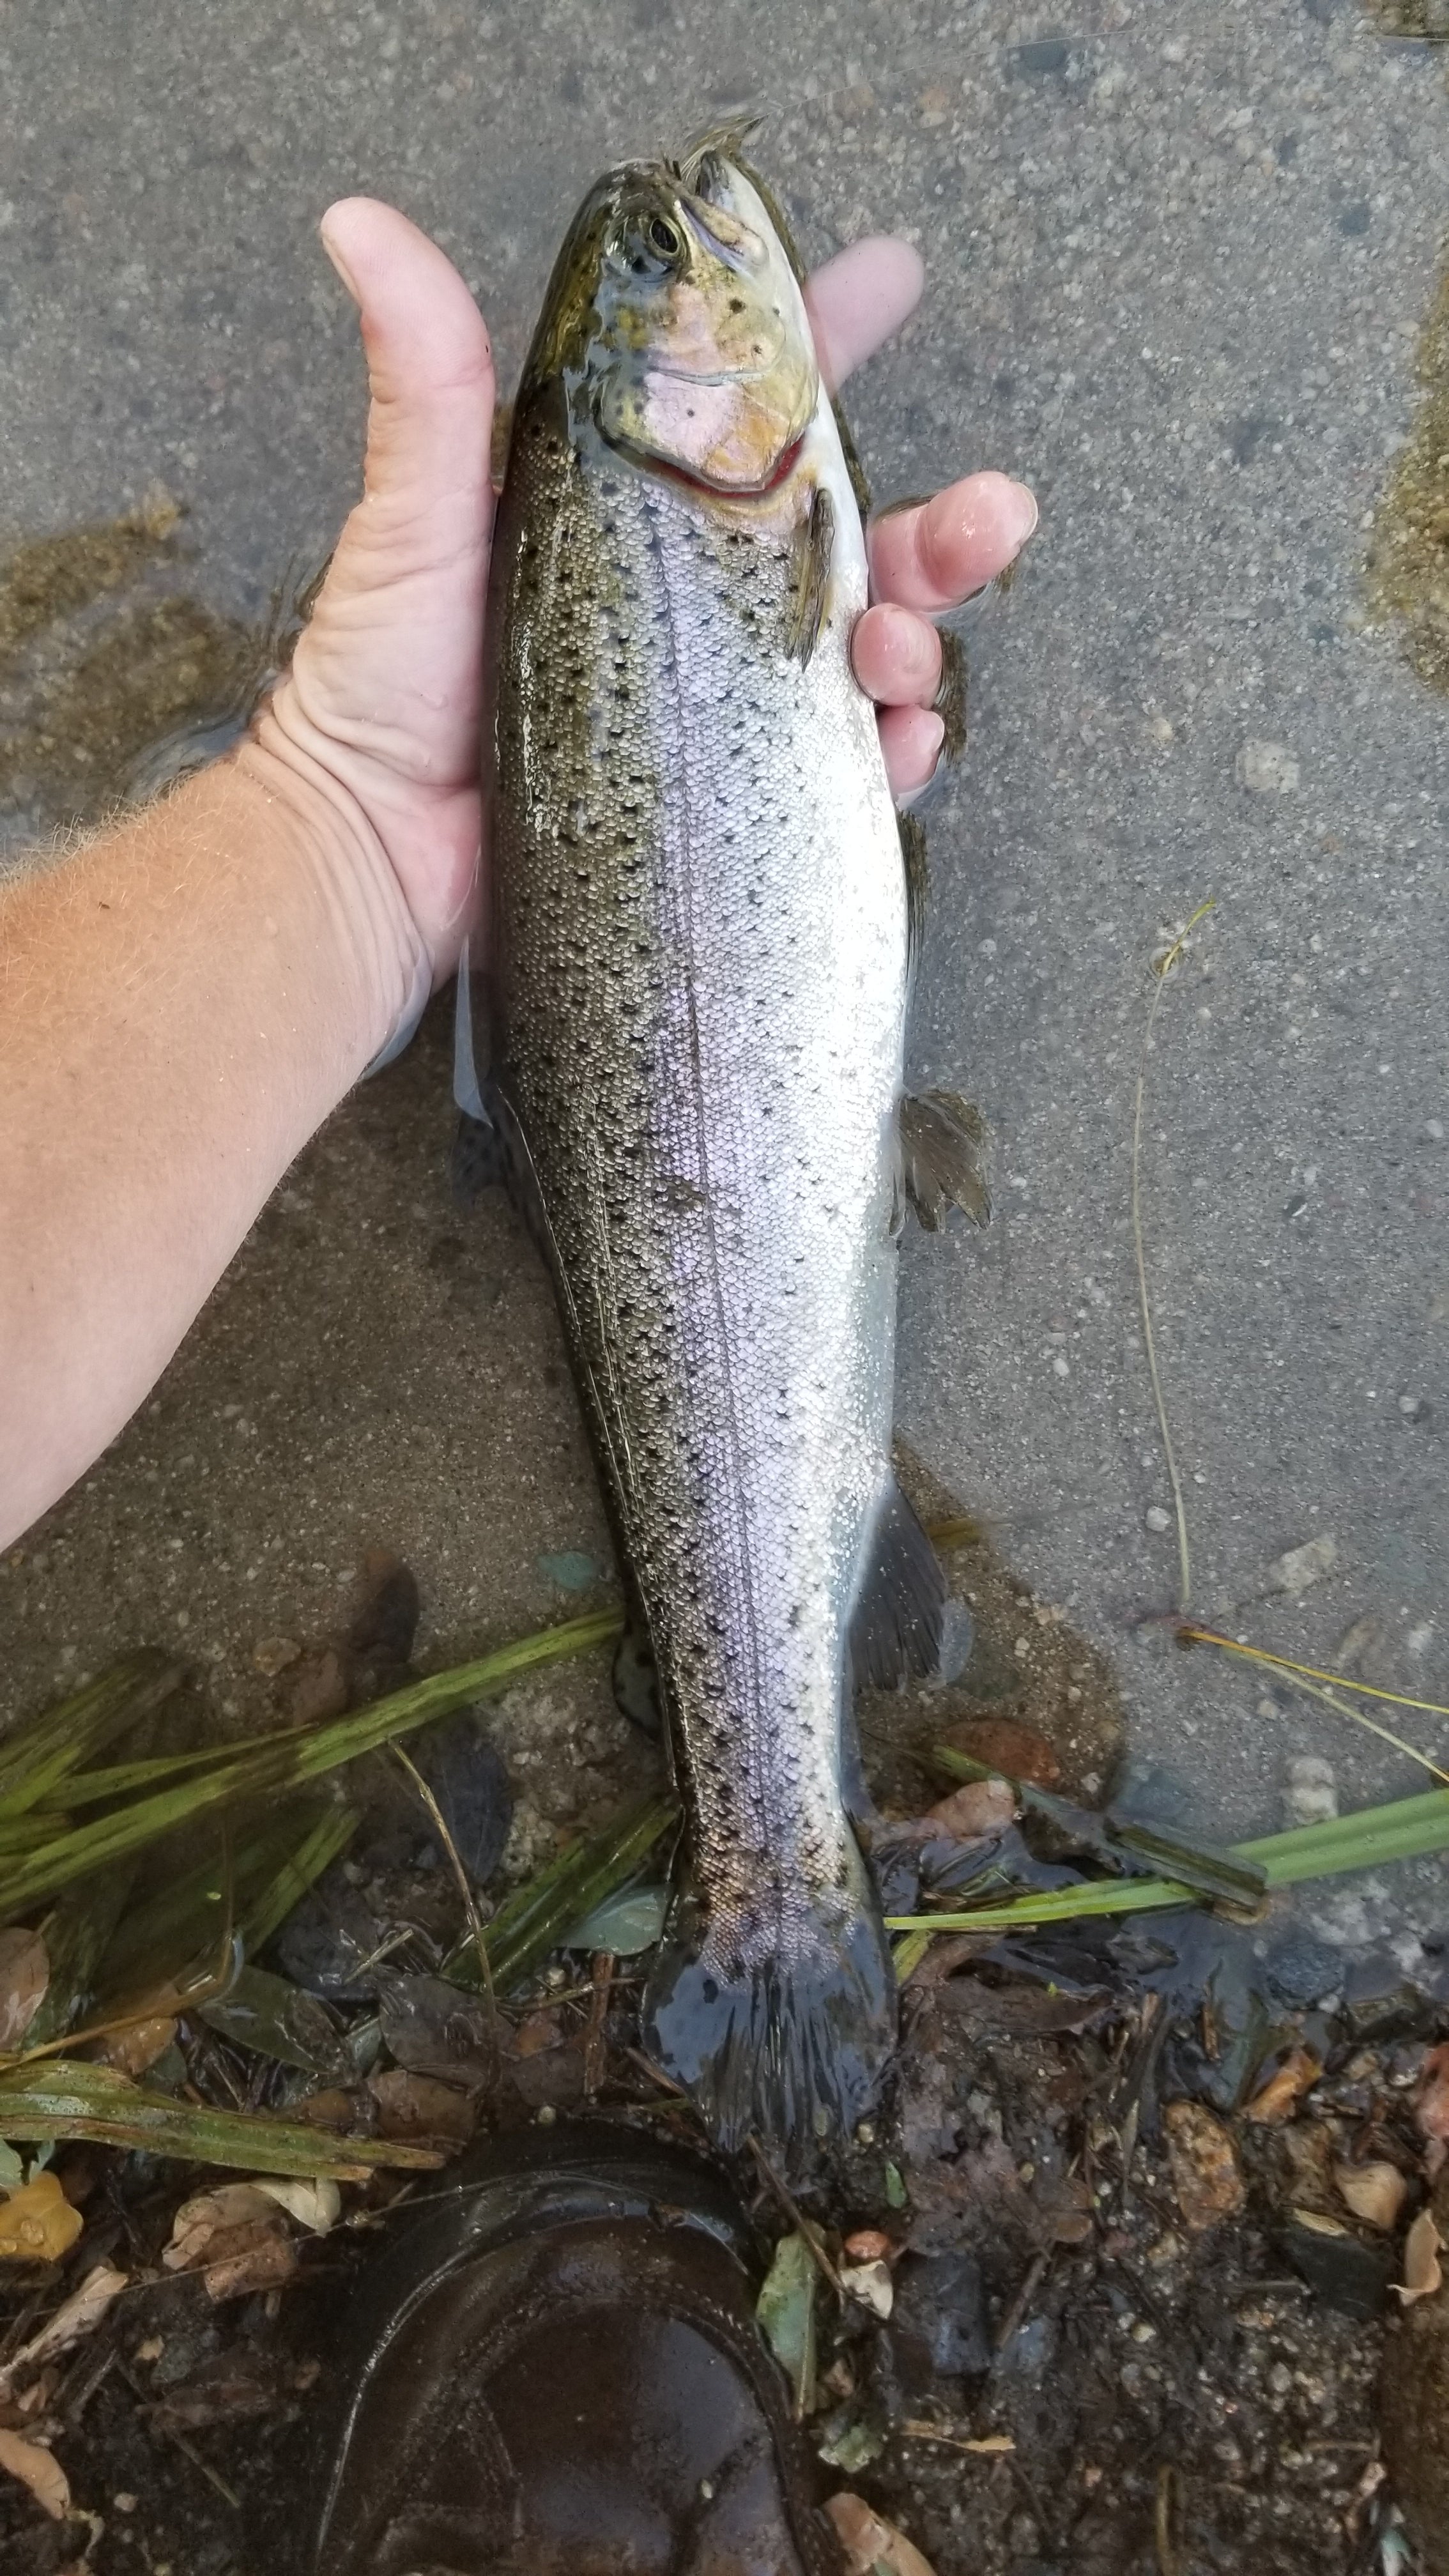 more trout.  I catch and release but I'm sure they would make a great campfire meal